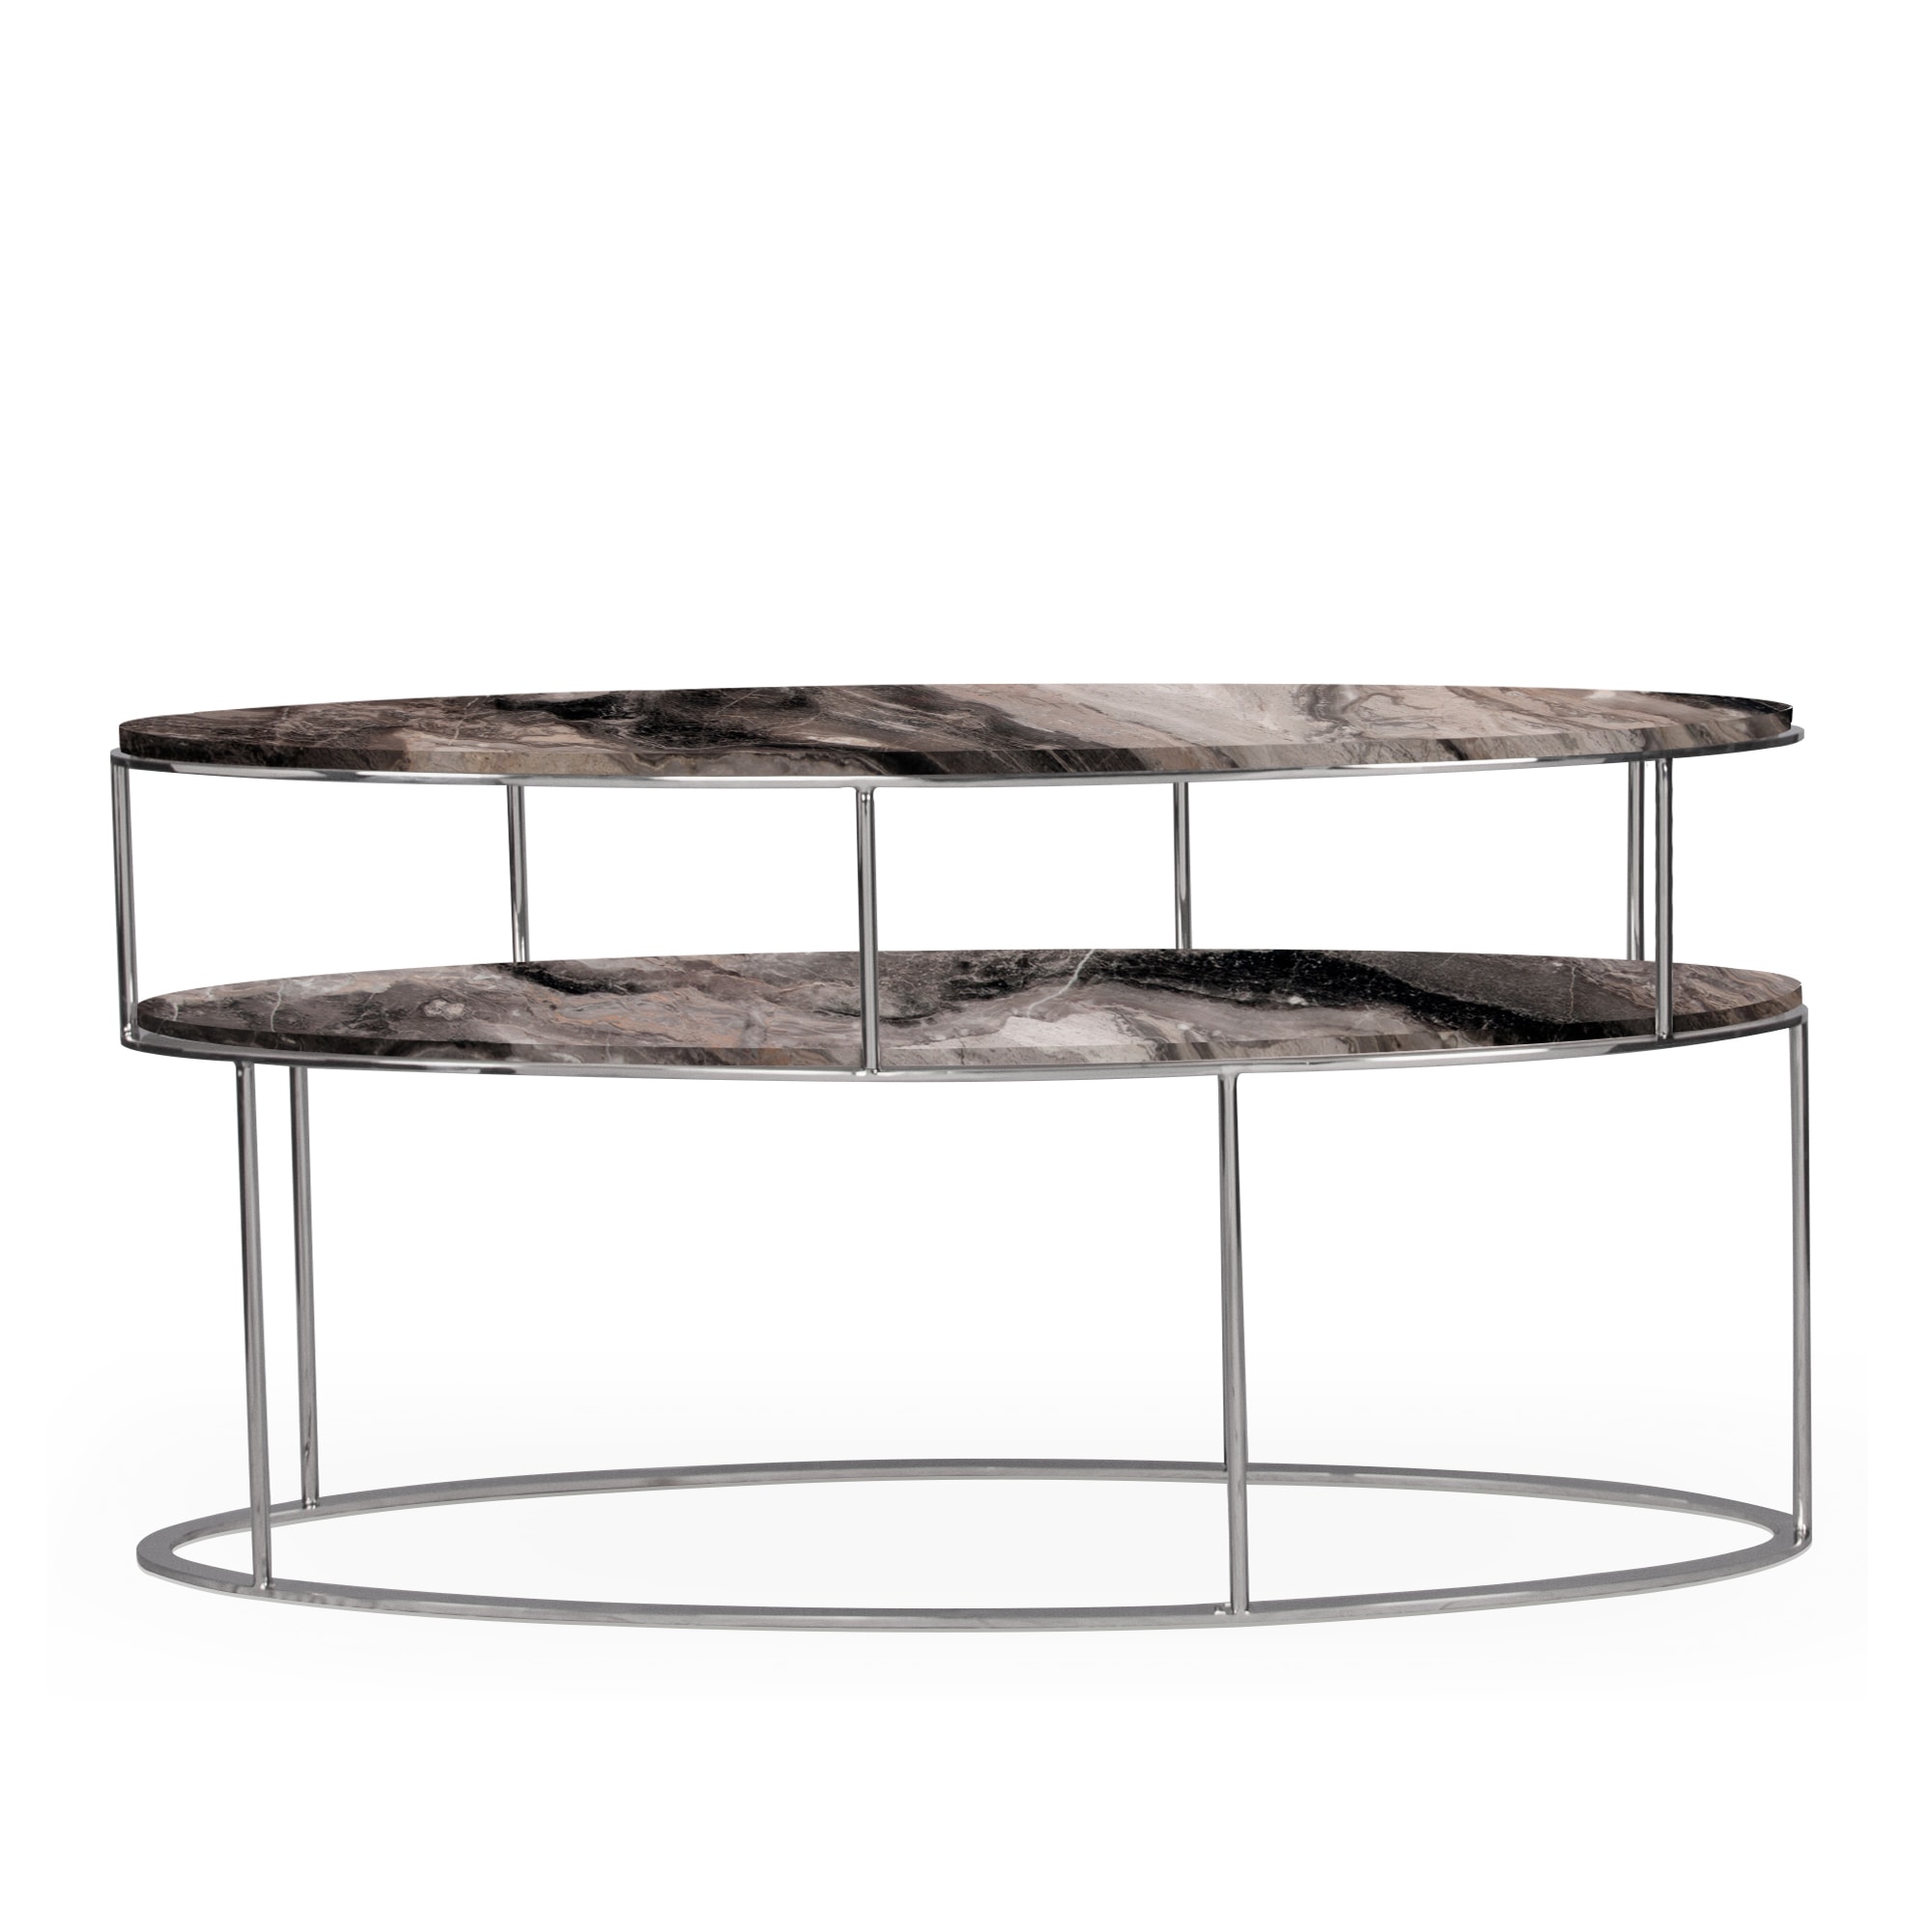 EXETER W | Decasa Marble Marble Dining Table